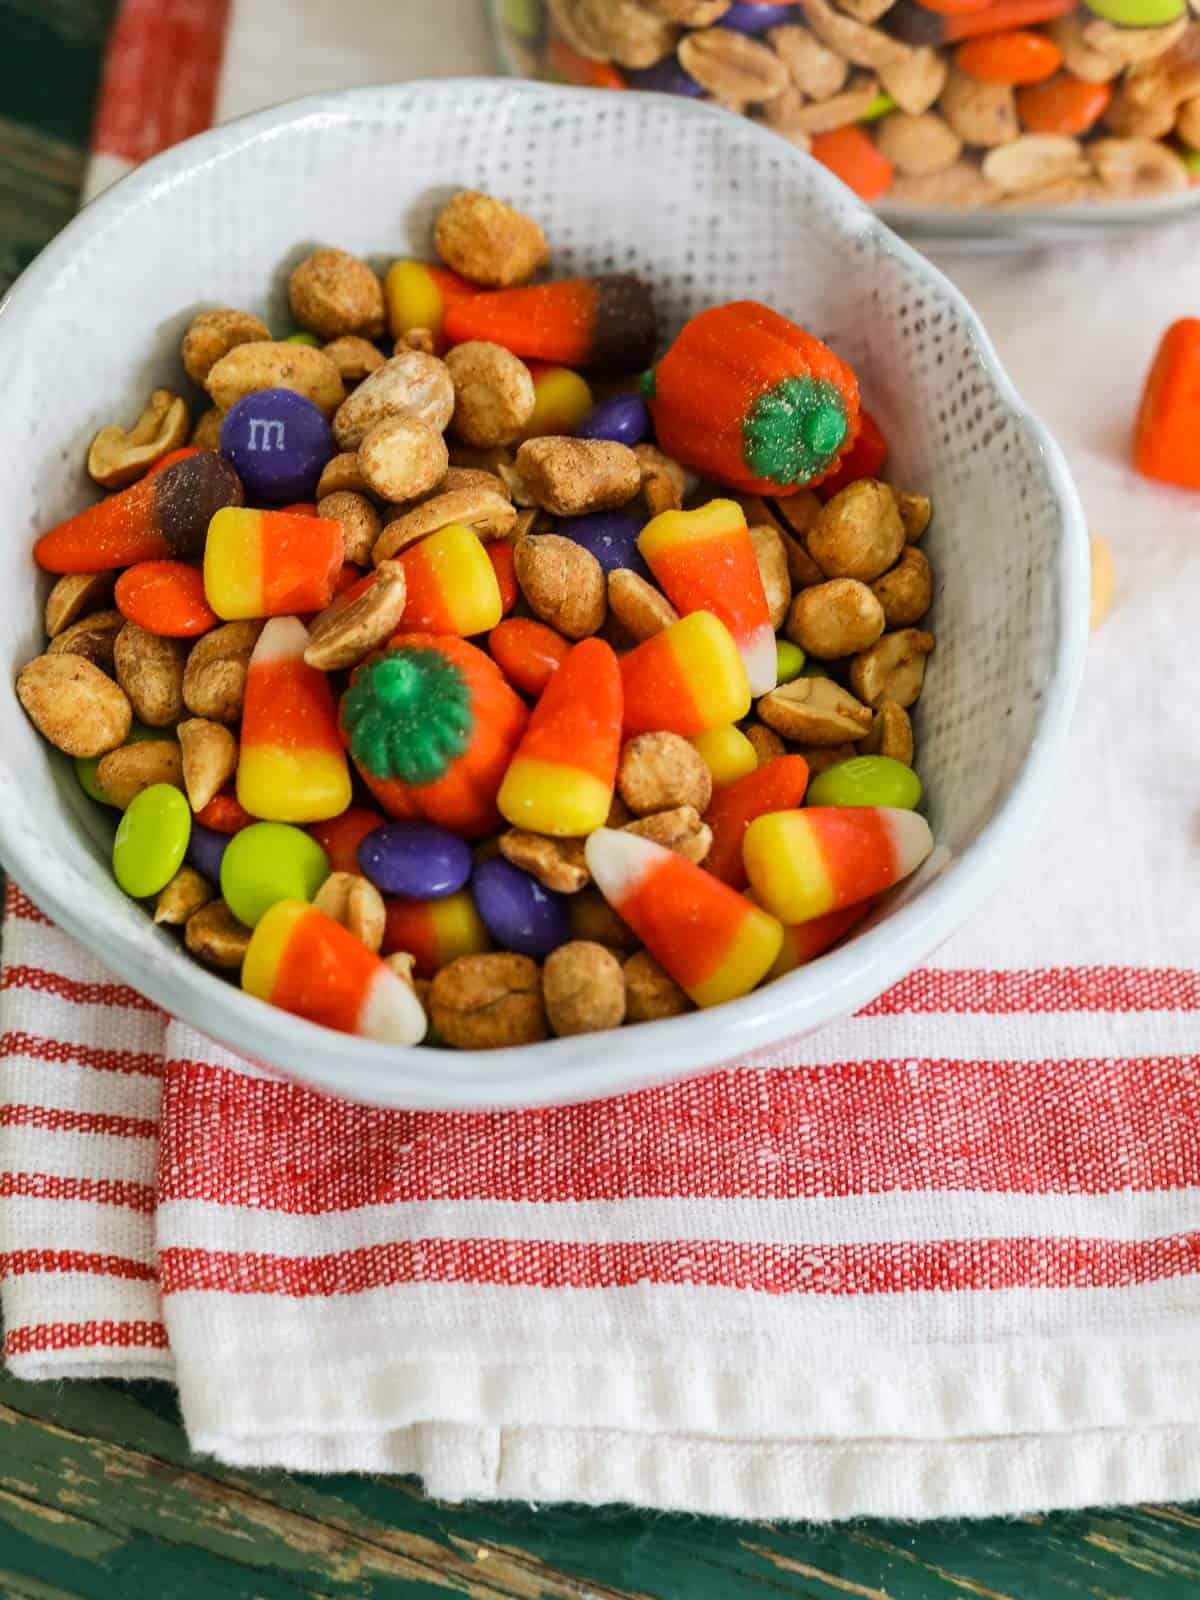 Easy Candy Corn Snack Mix Recipe - Make Candy Corn Even Better! - Chic n  Savvy